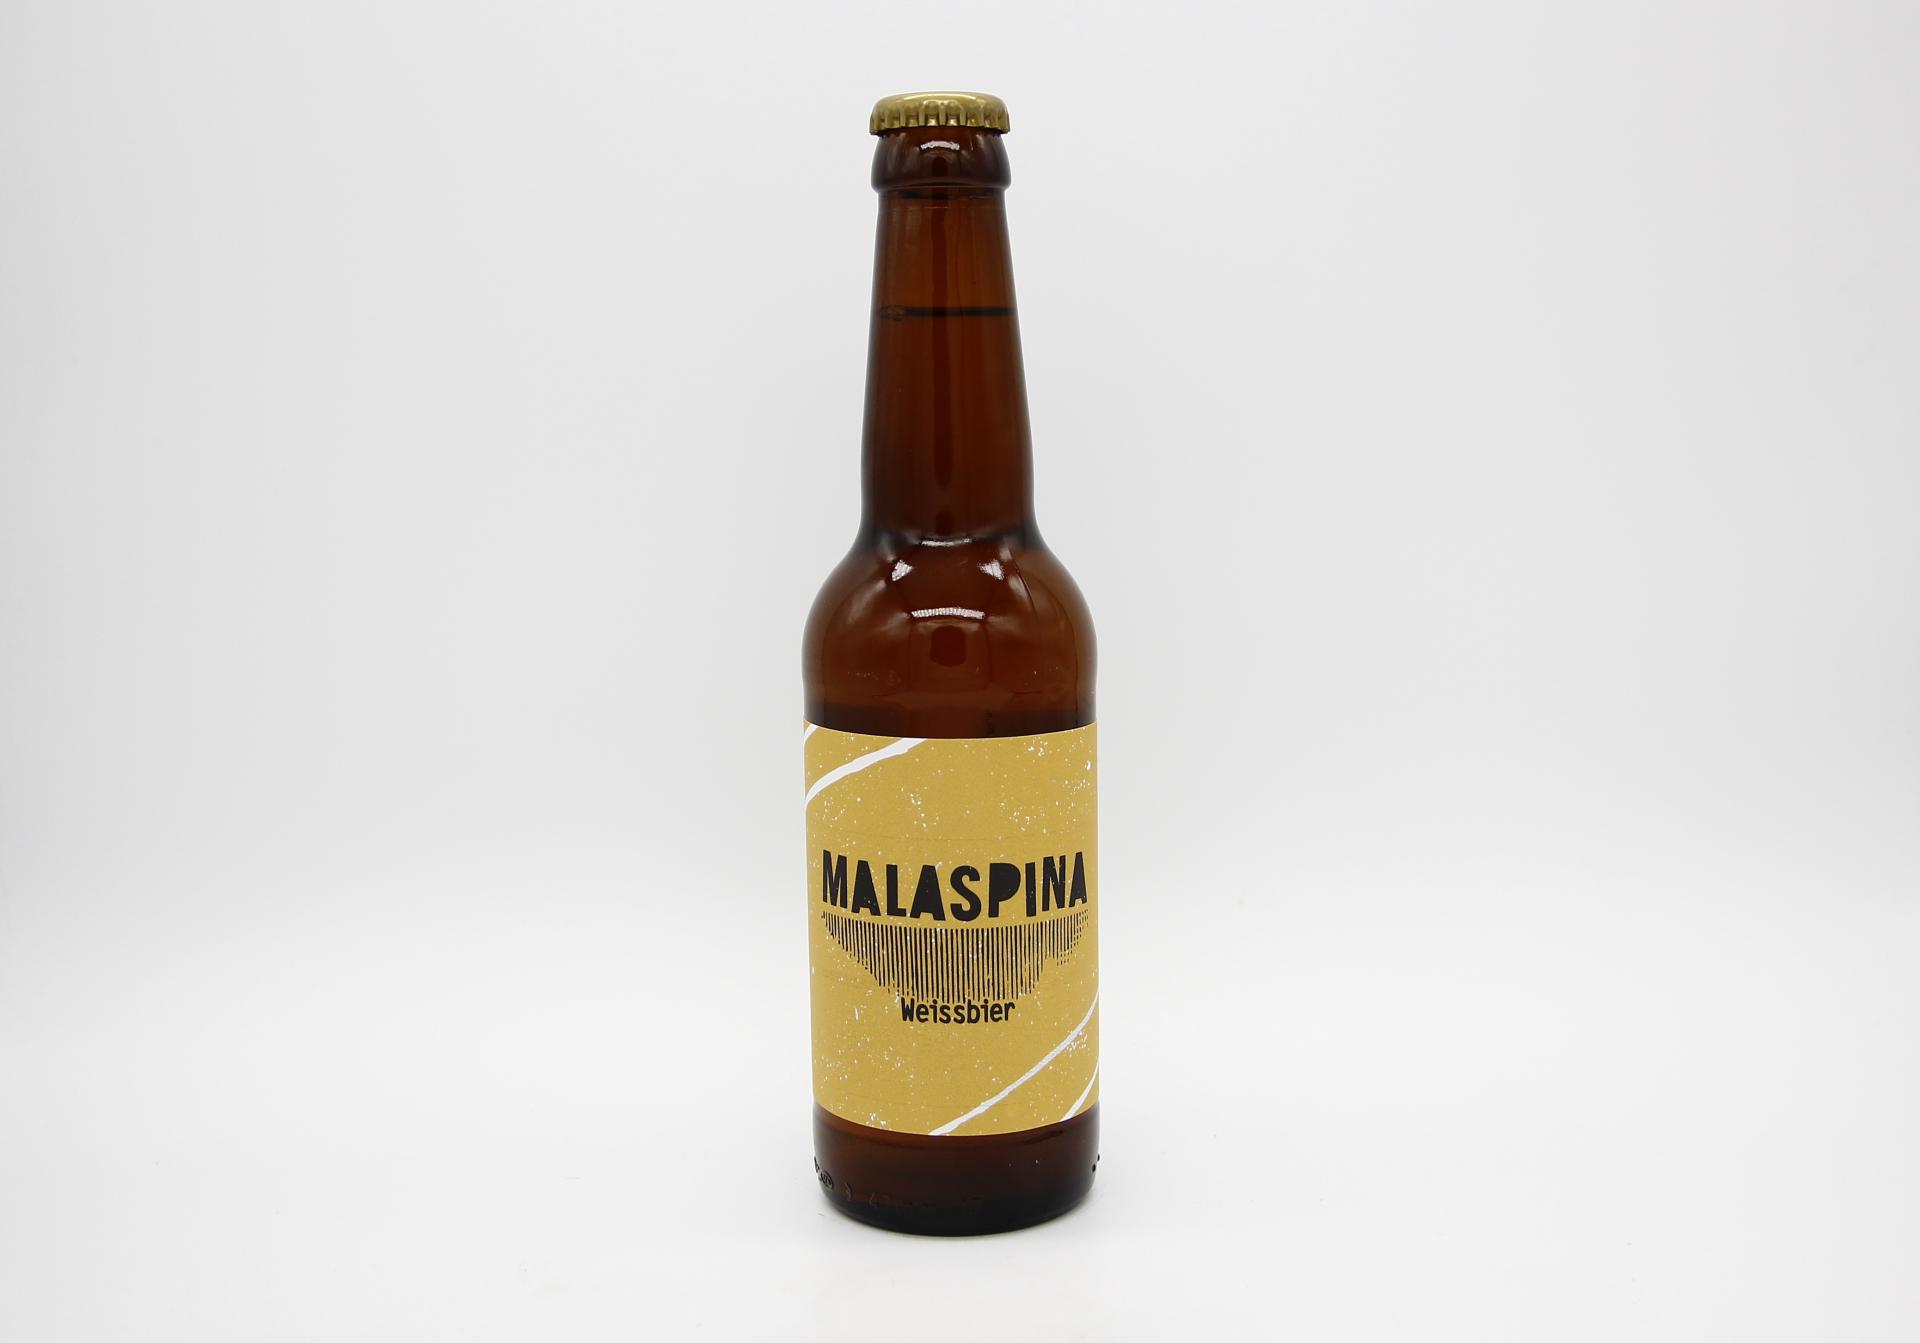 CASTELLÓ BEER FACTORY - MALASPINA 33cl